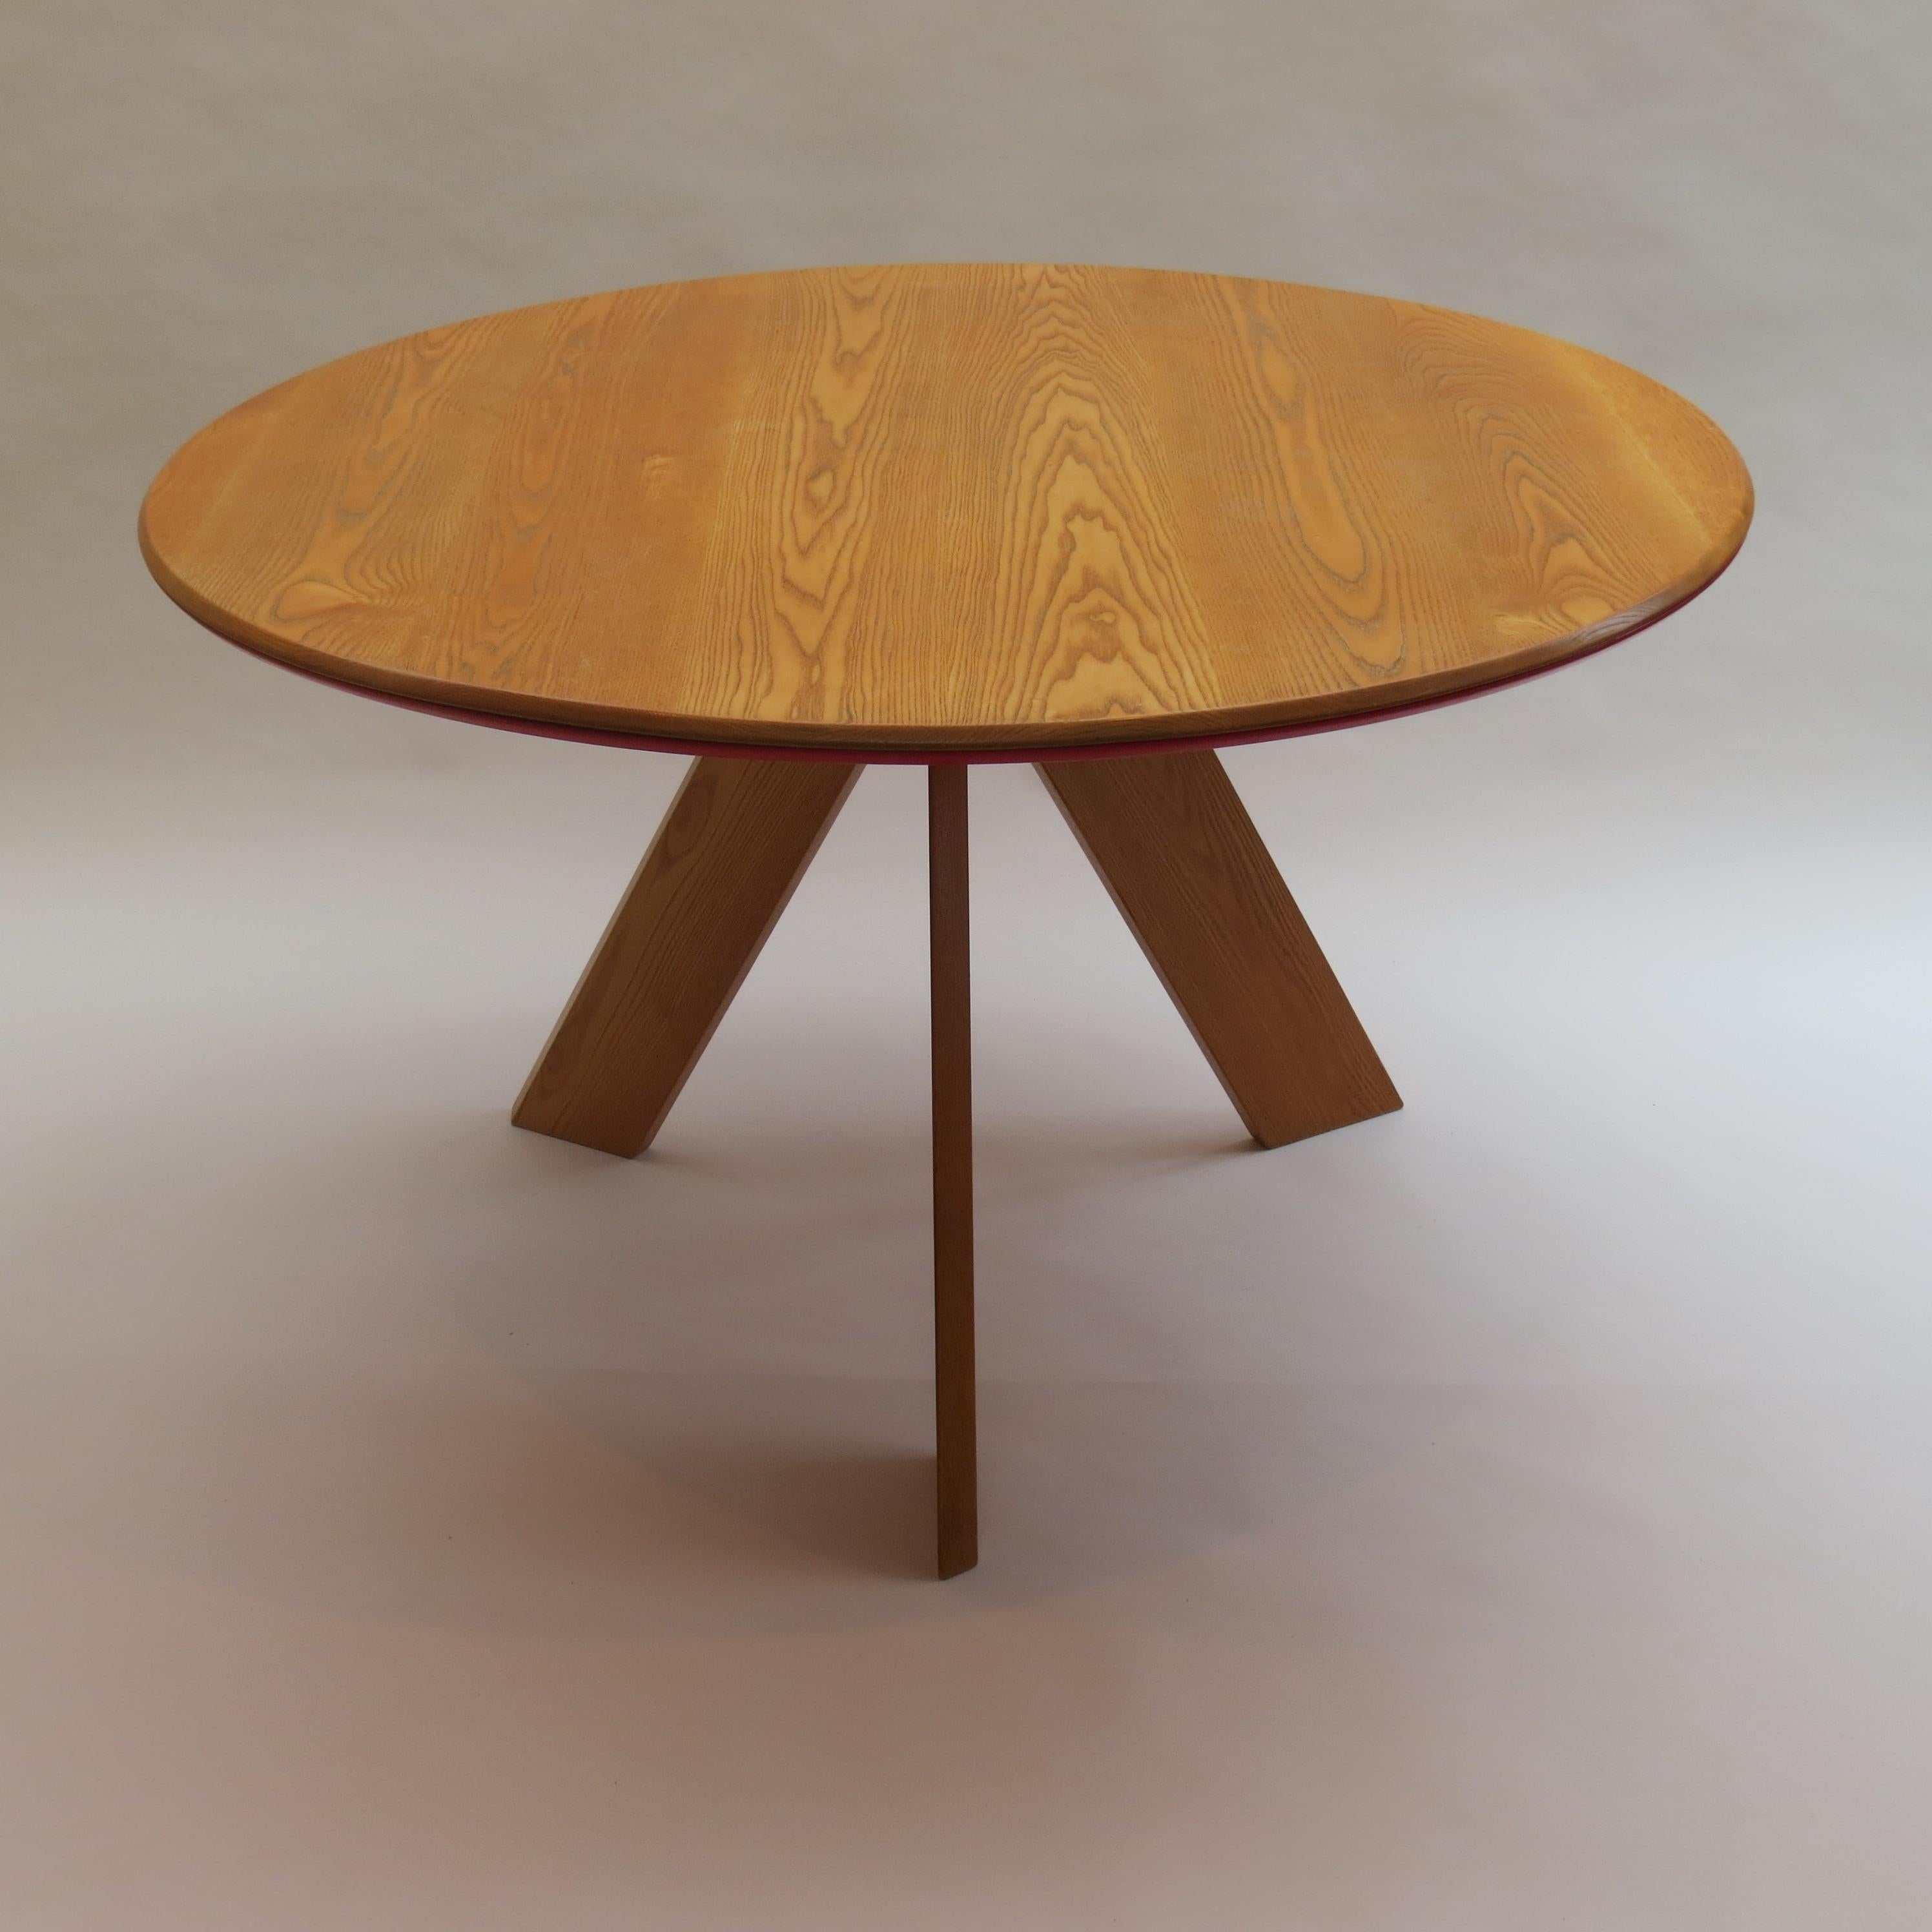 A very nicely detailed and good quality round dining table designed and produced by David Field. Bespoke made in solid ash base with blue aluminum Bose on the underside. The solid ash circular top has a painted red MDF to the underside.

A very